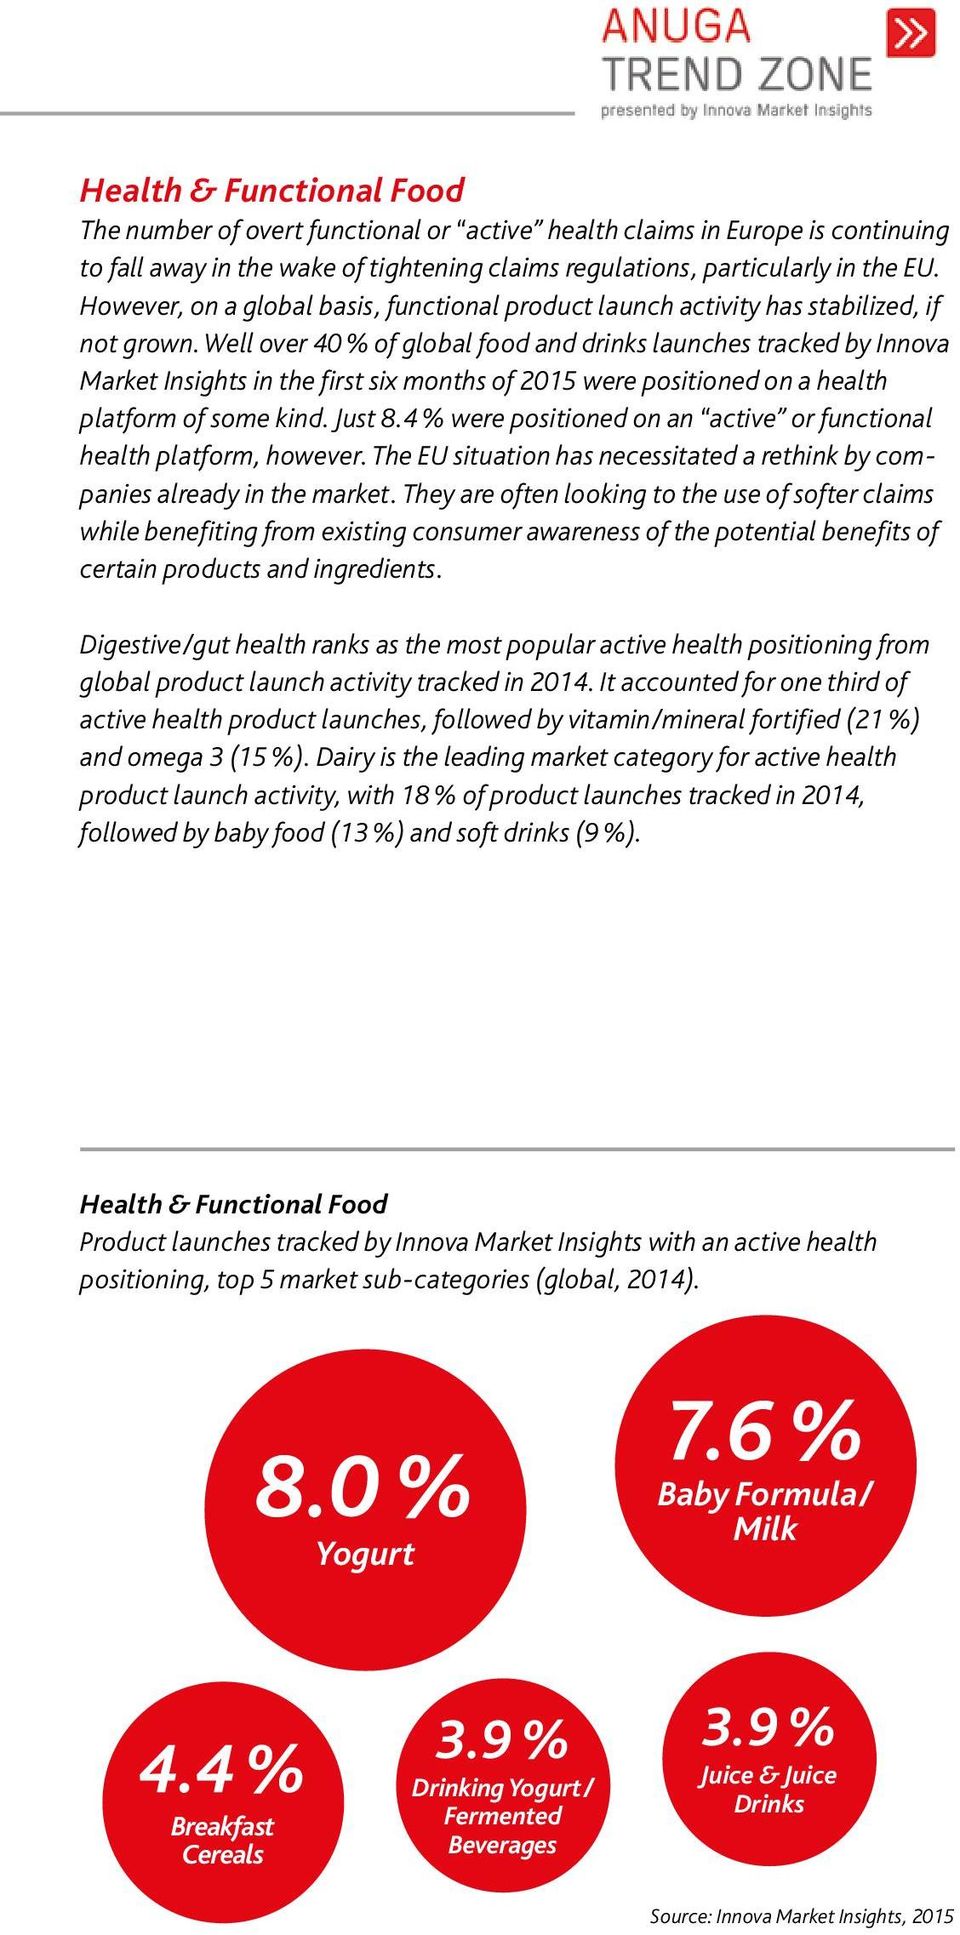 Well over 40 % of global food and drinks launches tracked by Innova Market Insights in the first six months of 2015 were positioned on a health platform of some kind. Just 8.